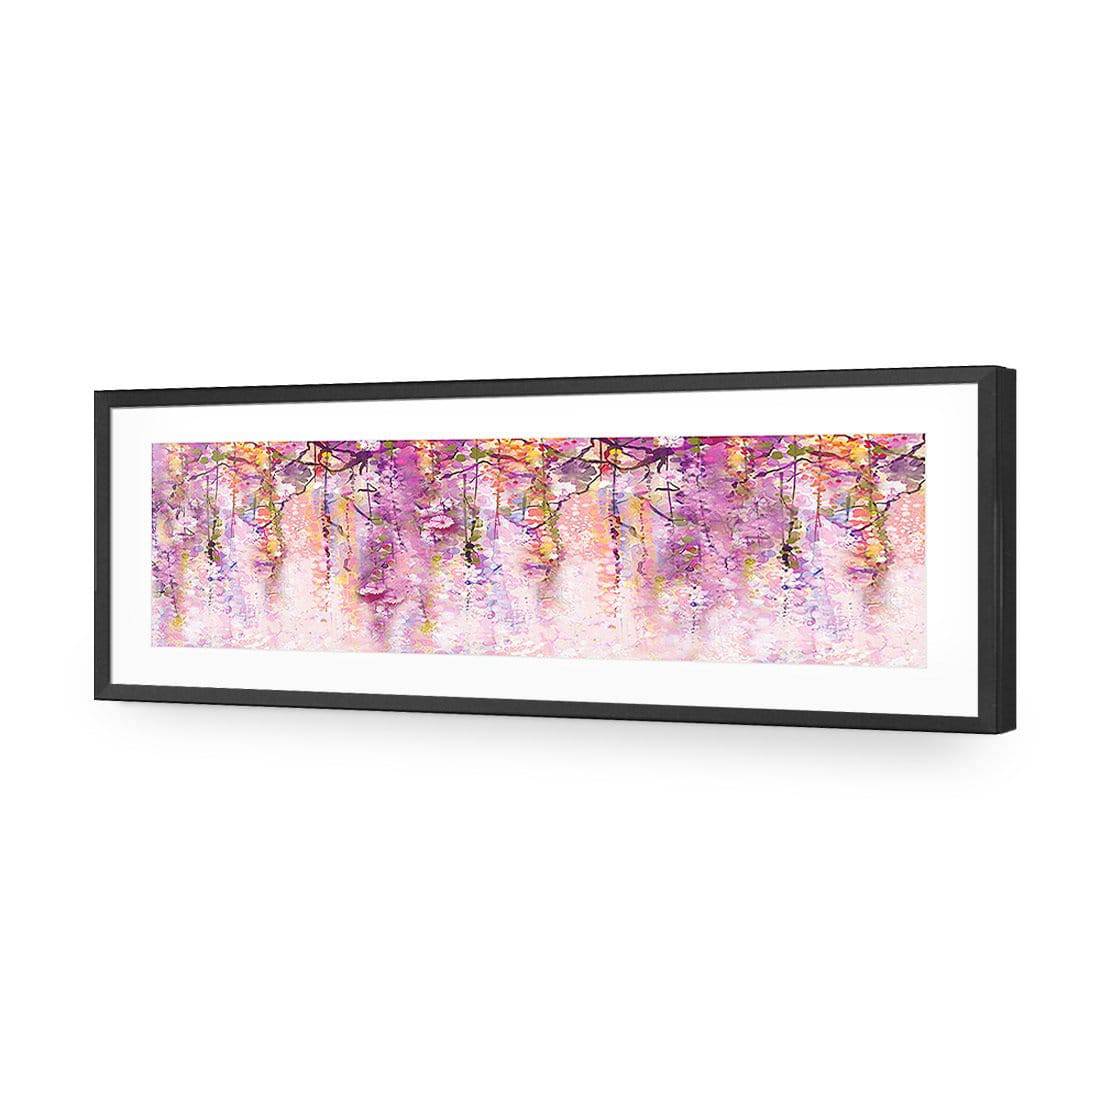 Lilac Dream, Long-Acrylic-Wall Art Design-With Border-Acrylic - Black Frame-60x20cm-Wall Art Designs